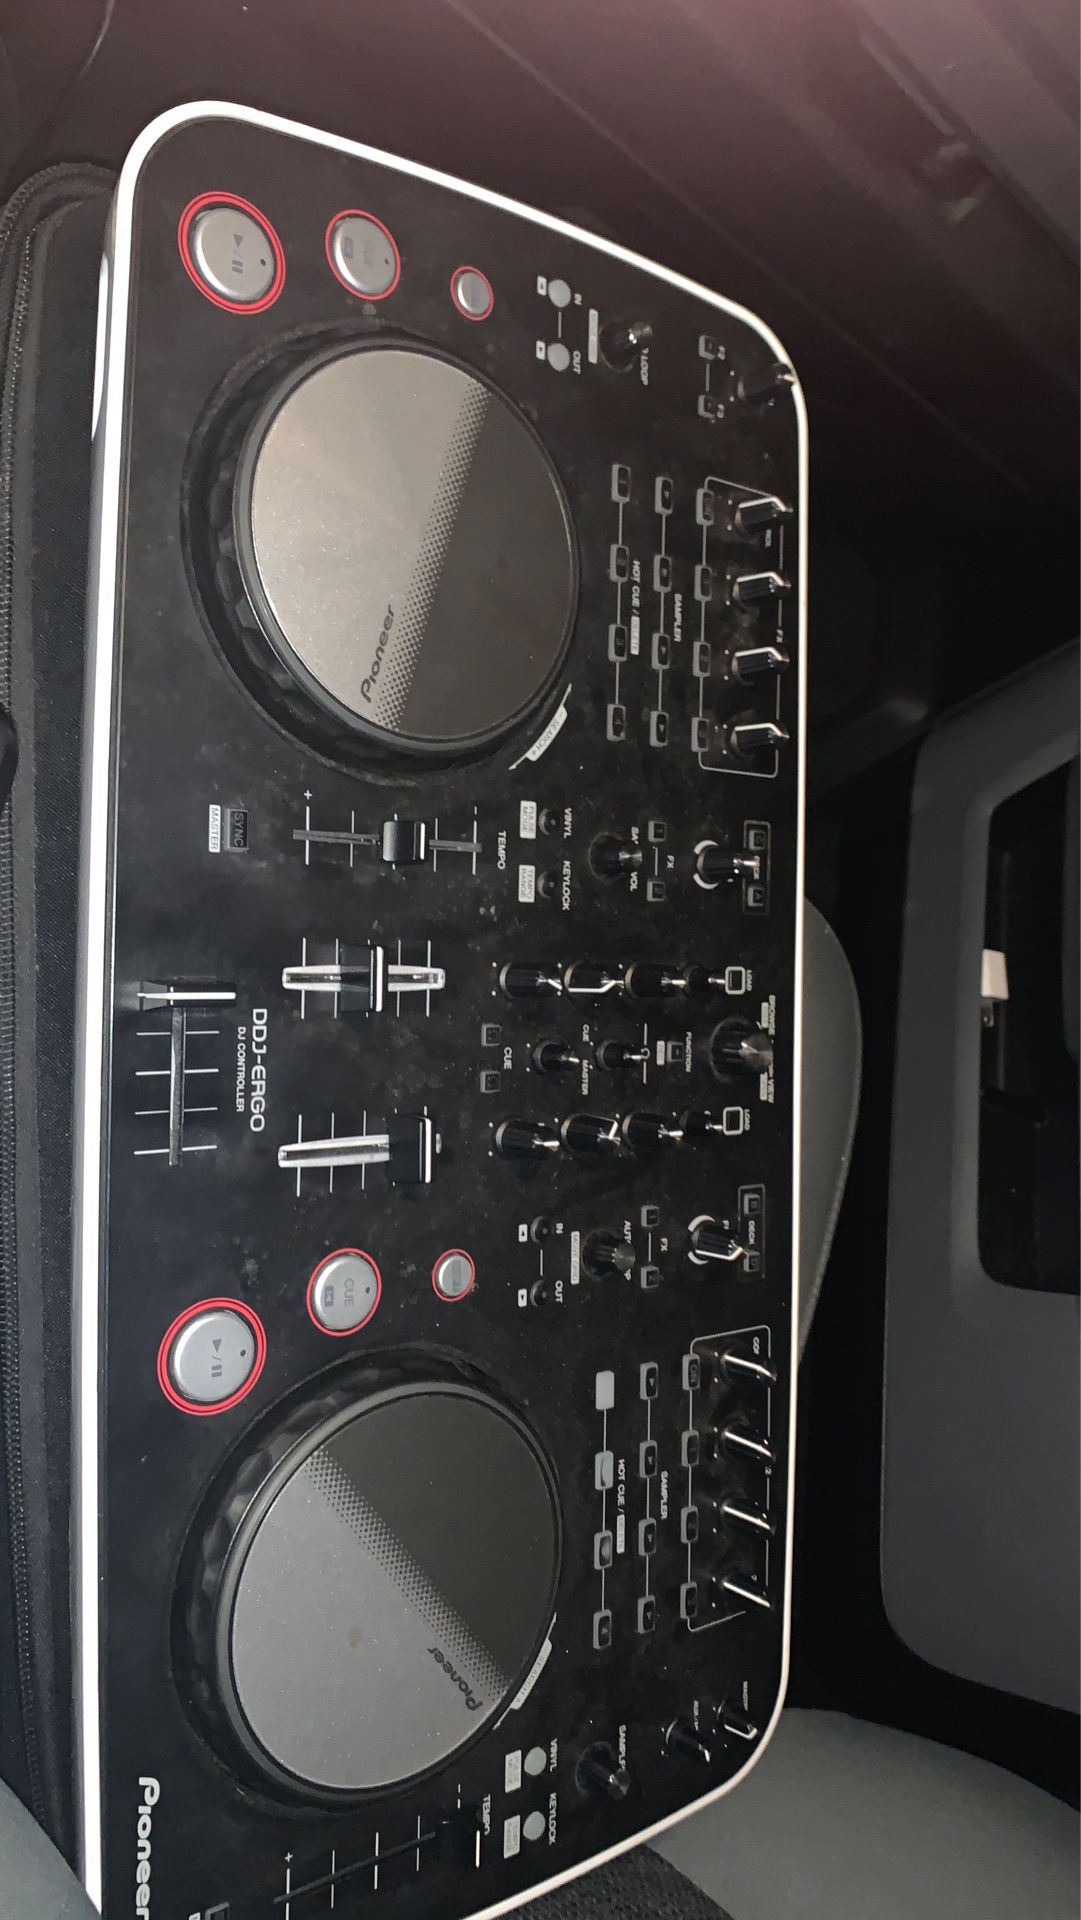 DJ mix deck it been use just to time best offer